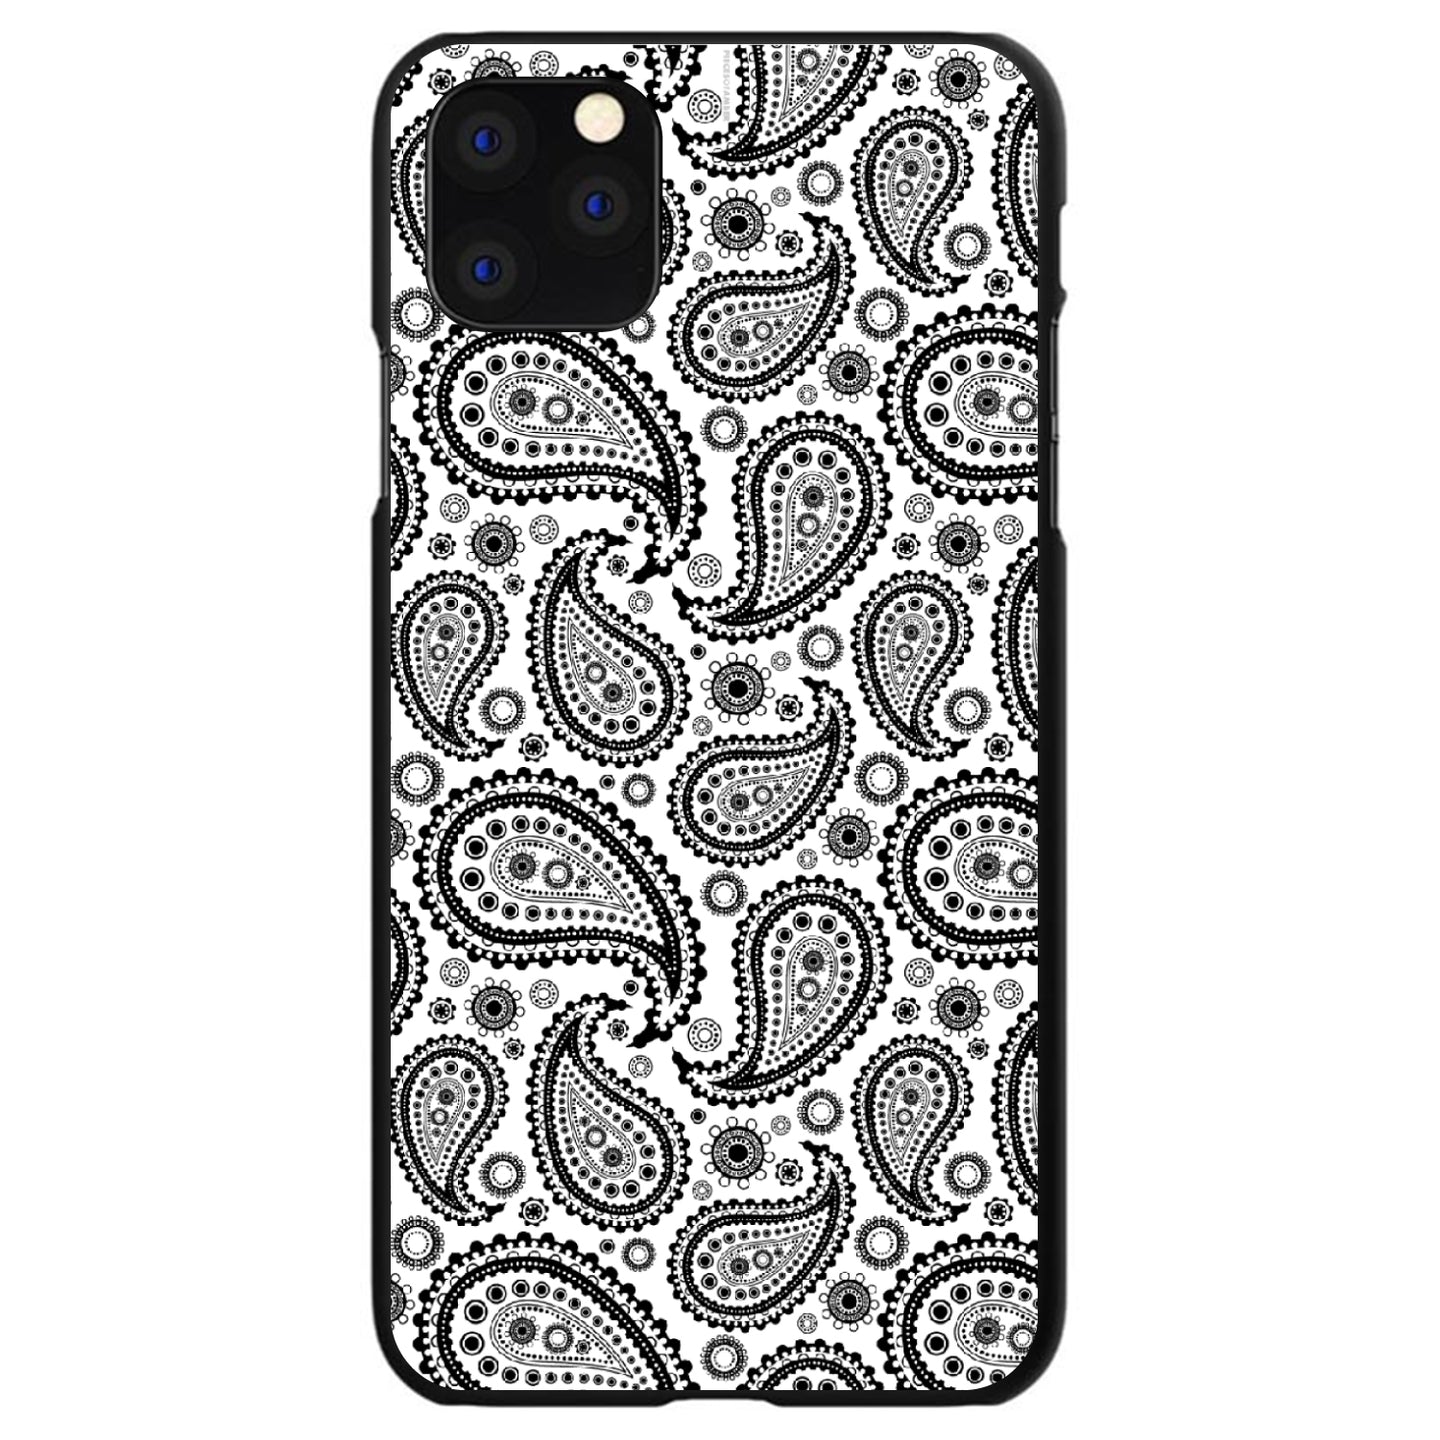 DistinctInk® Hard Plastic Snap-On Case for Apple iPhone or Samsung Galaxy - Black & White Paisley